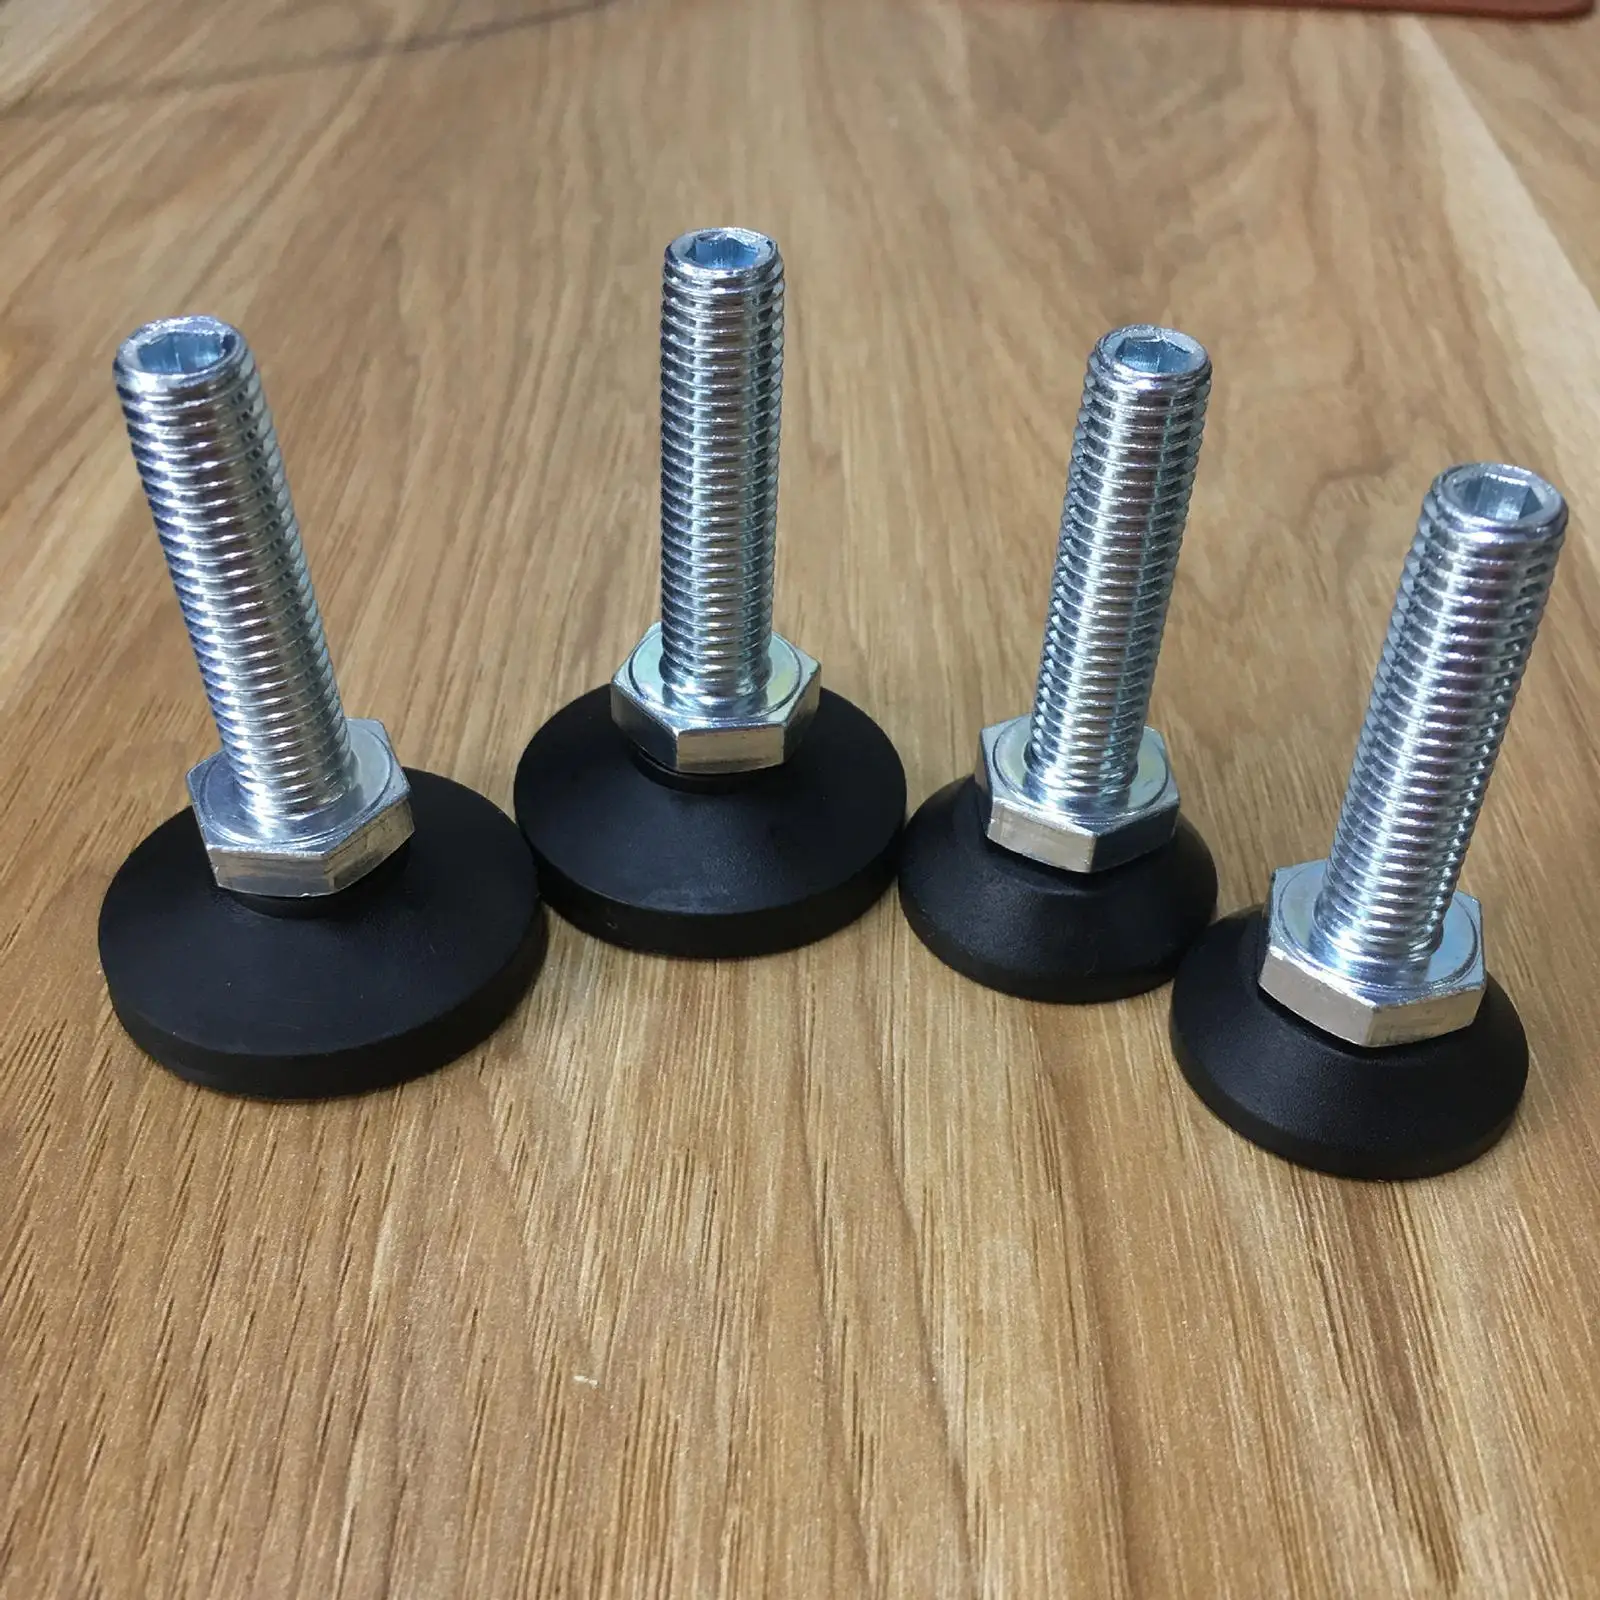 4 Pieces Leveling Feet M10 Threaded Furniture Glide Leveling Nonslip Table Floor Protector for Cabinets Wardrobe Bench Furniture